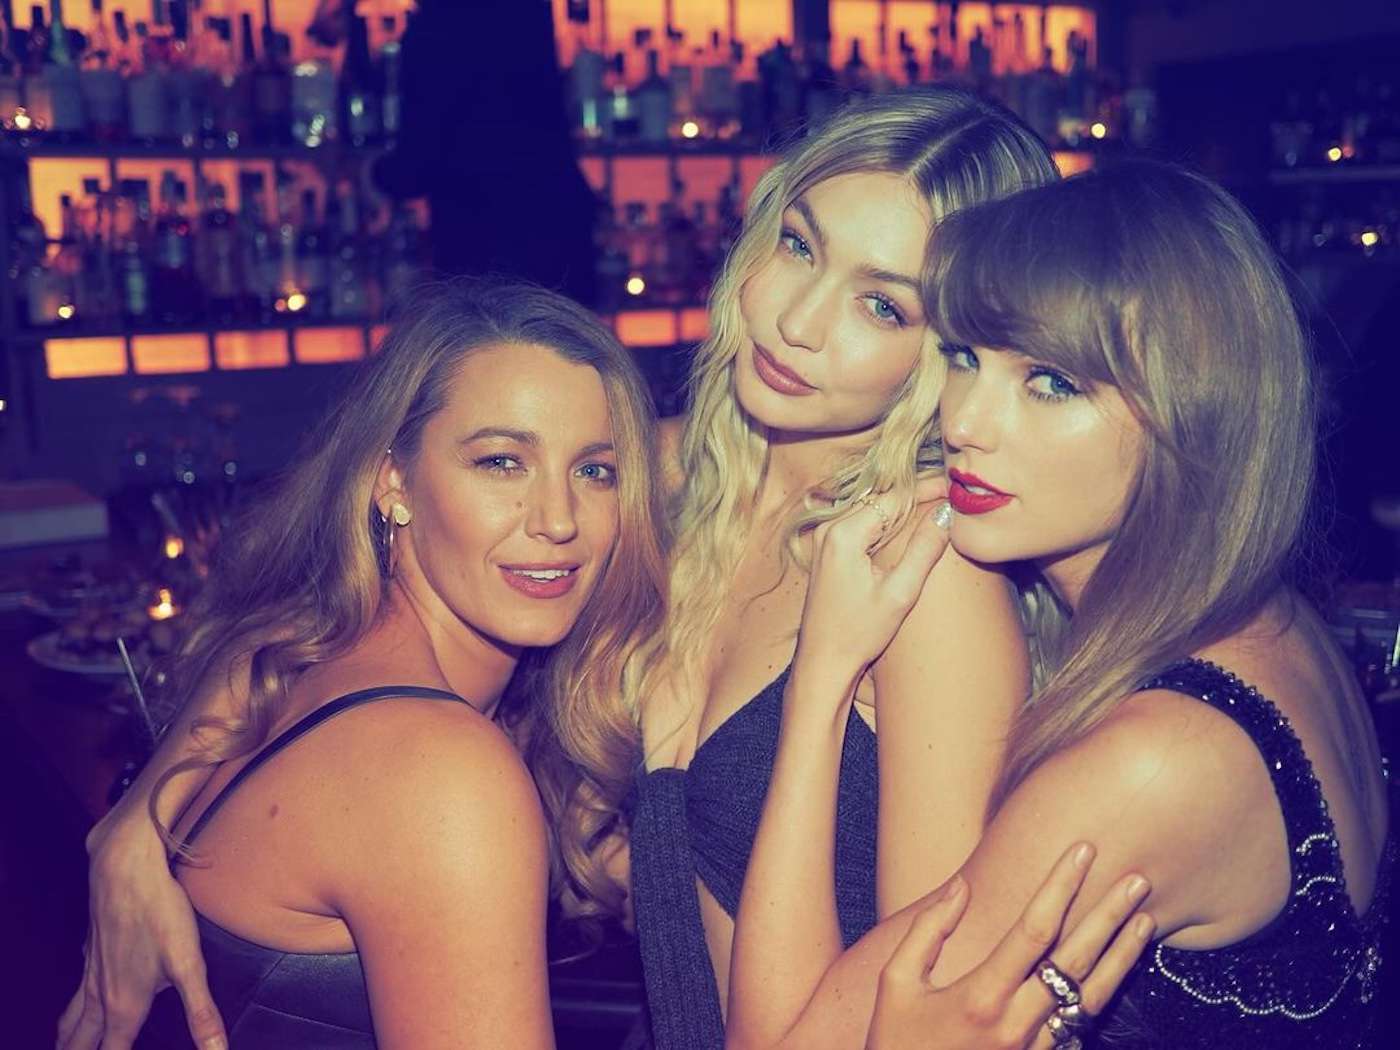 Taylor Swift Birthday Party